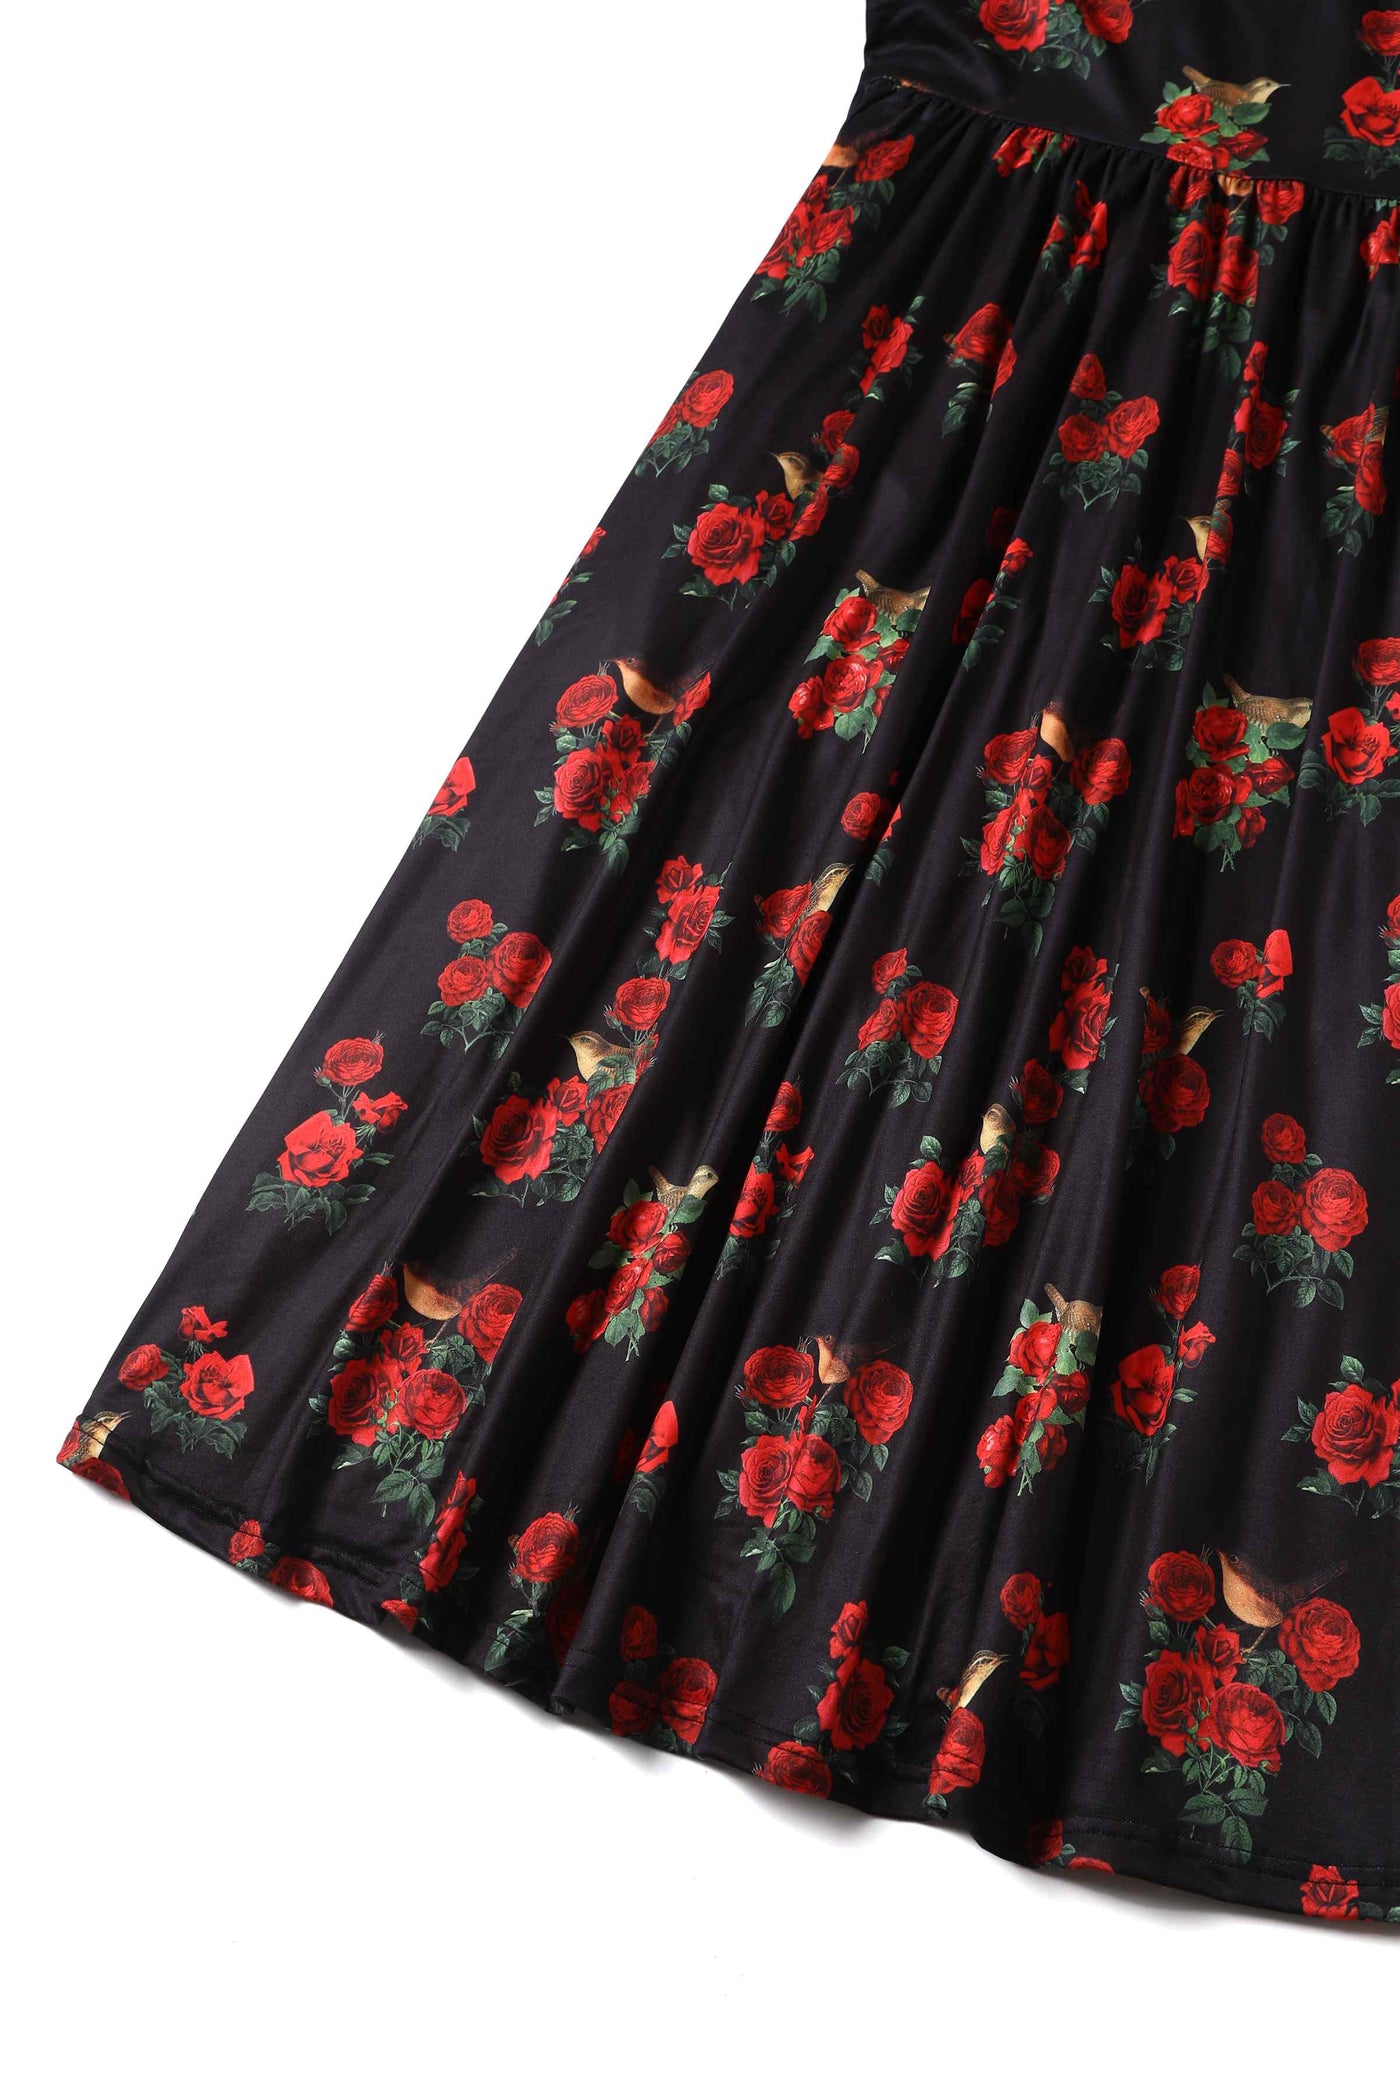 Close up View of Red Rose and Bird Print Long Sleeved Dress in Black